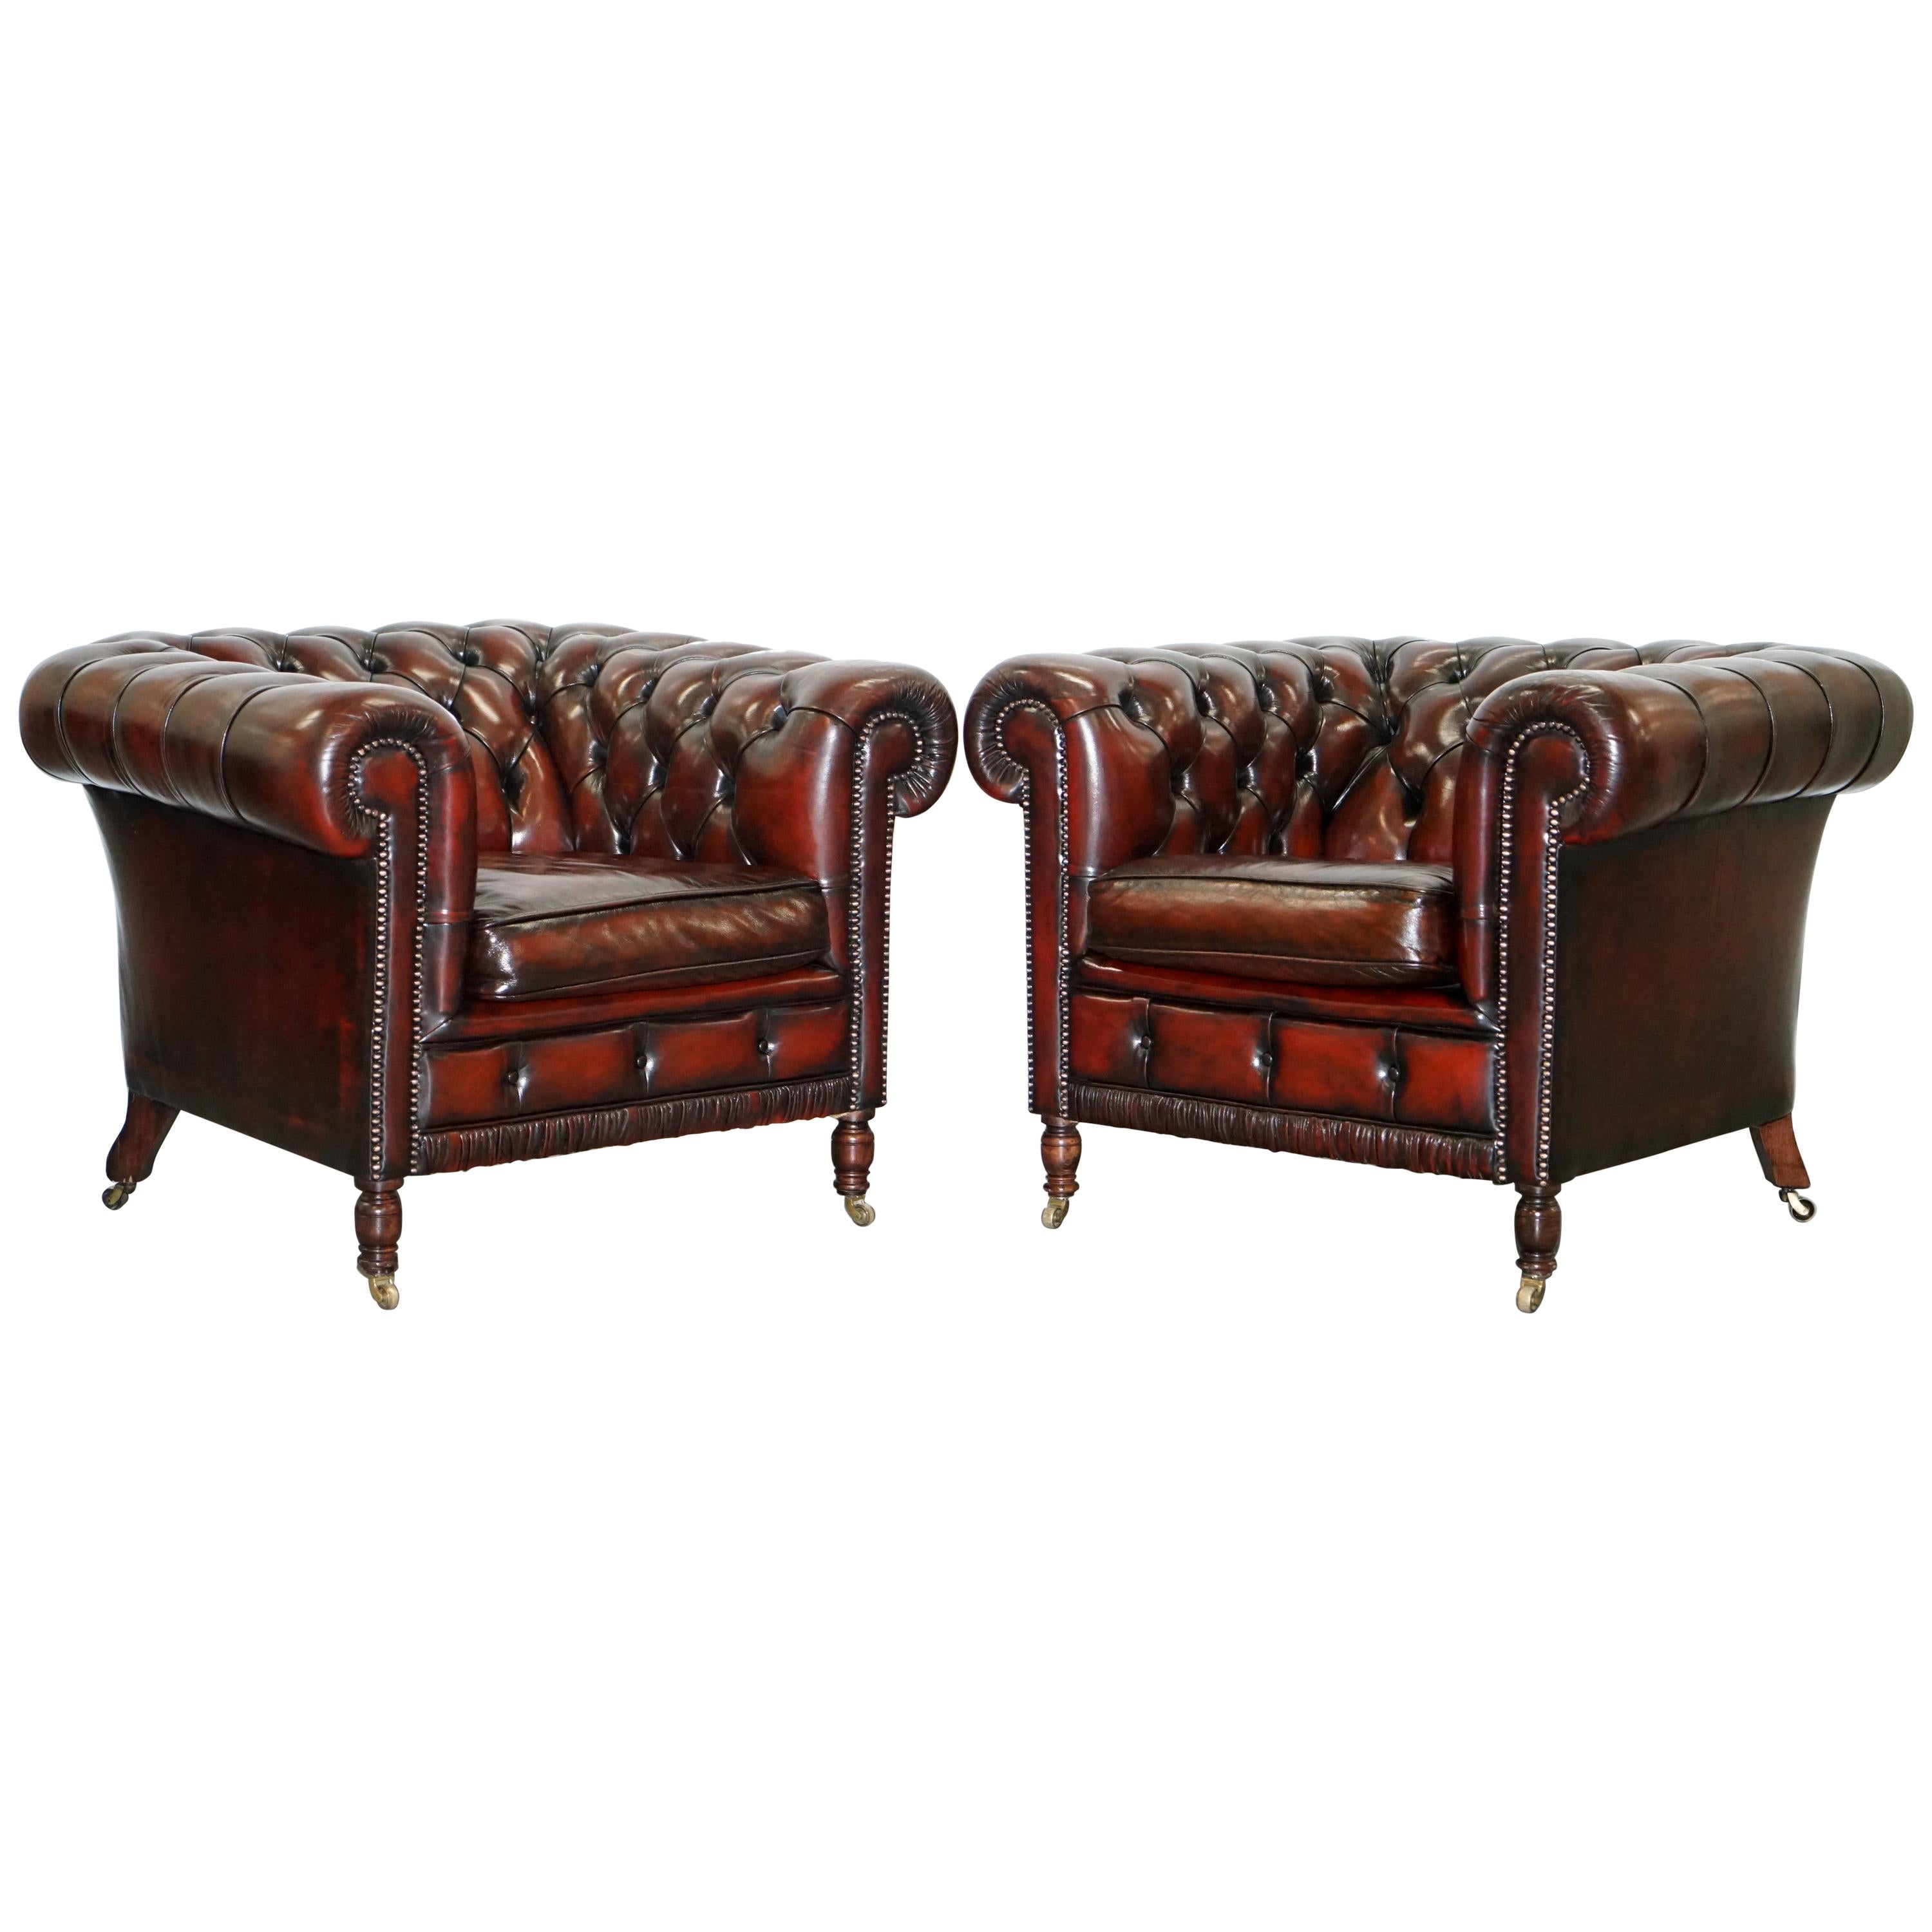 We are delighted to offer for sale this stunning very rare handmade in England fully restored Bordeaux leather Gentleman's club suite with hand turned legs finished with castors 

Where to begin! This suite is absolute eye candy from every angle,